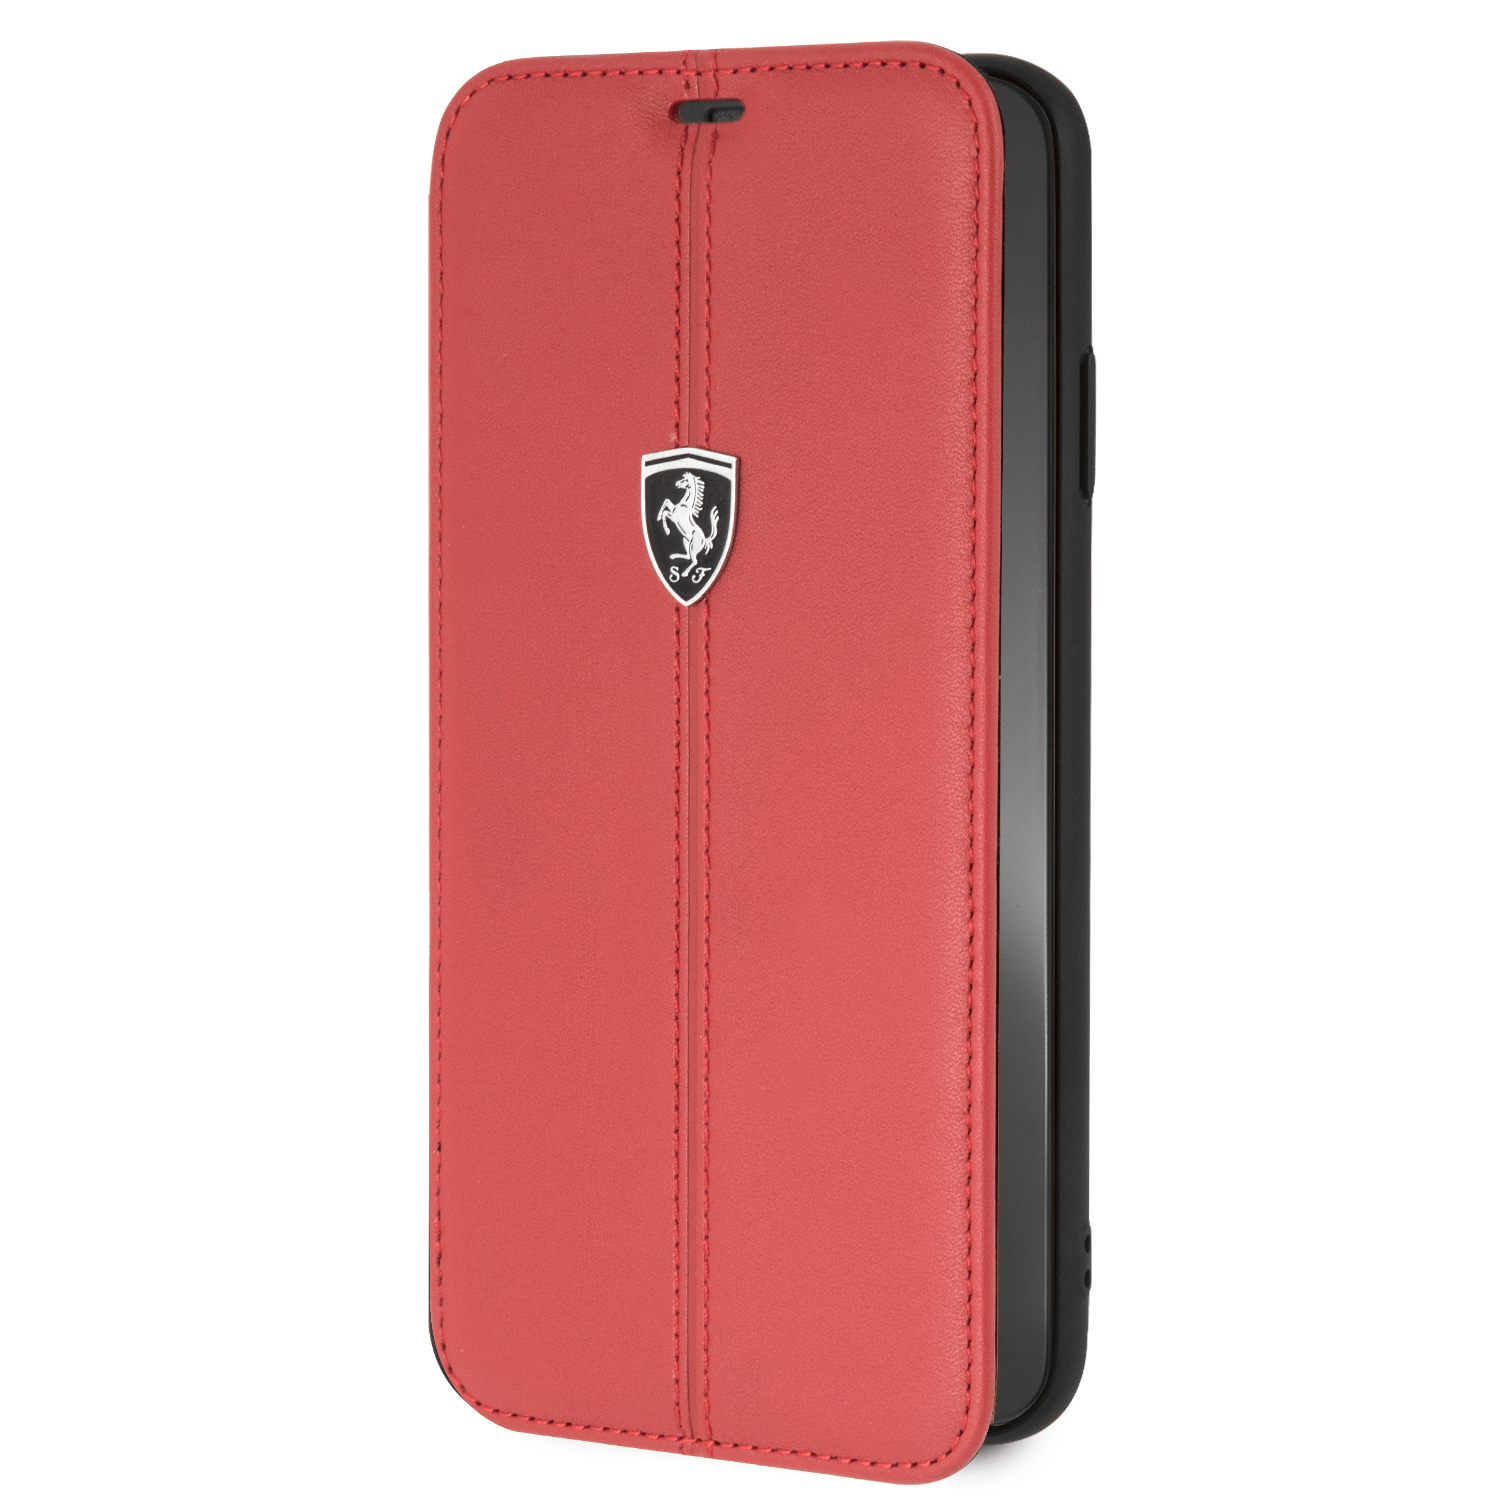 Introducing the Official Ferrari Authentic Bookstyle Case for iPhone XS Max, combining luxury with functionality for a sophisticated mobile experience